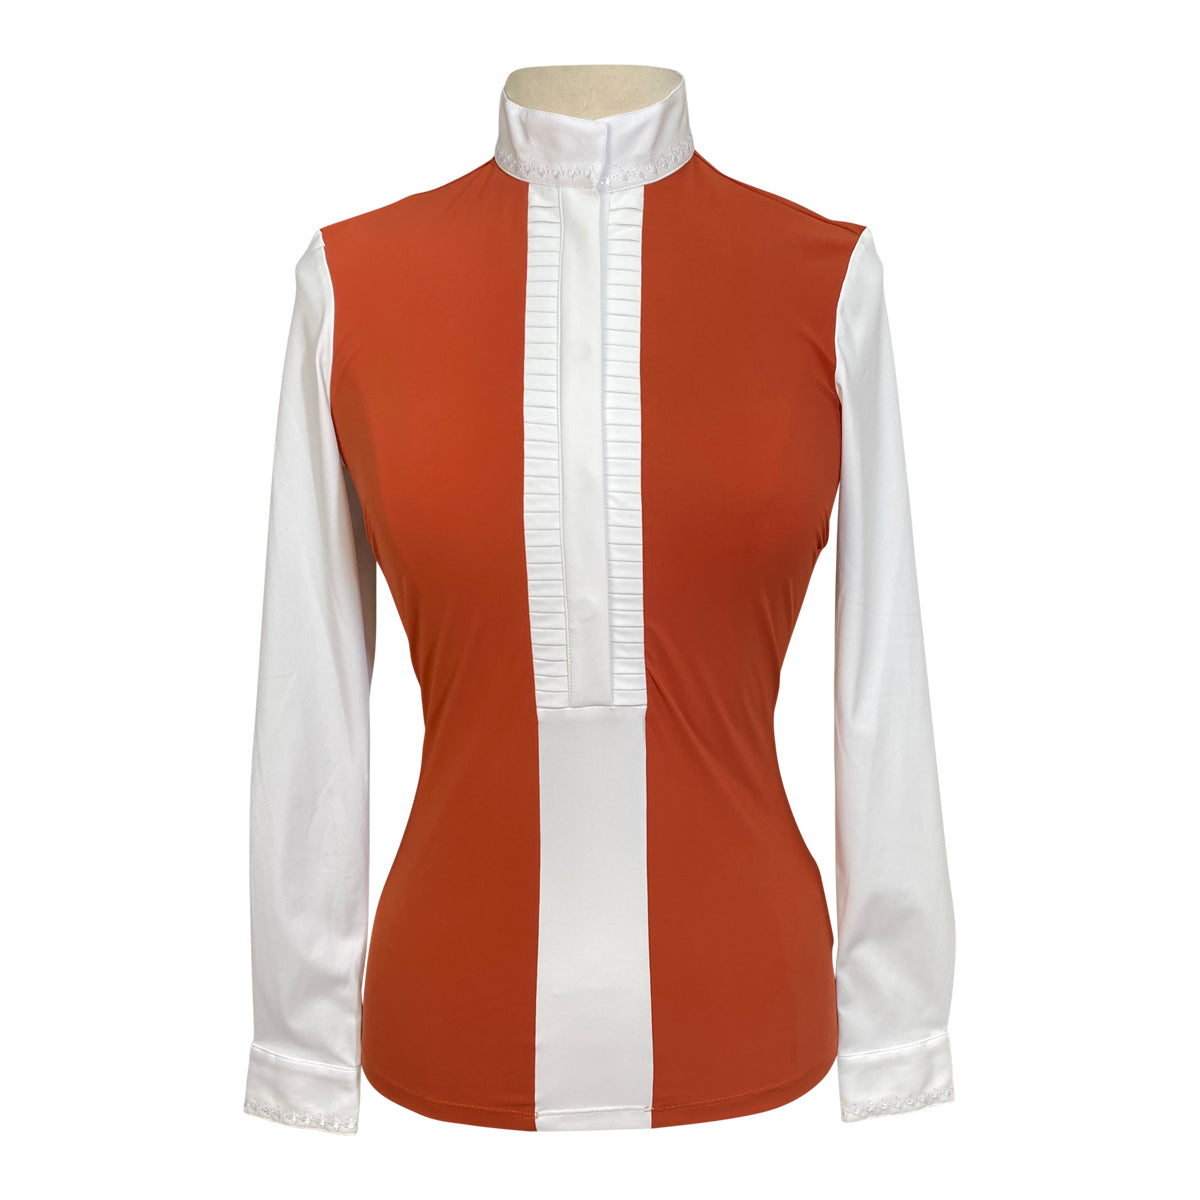 Cavalleria Toscana Competition Shirt Pleated Jersey L/S in Orange/White  - Women&#39;s Small